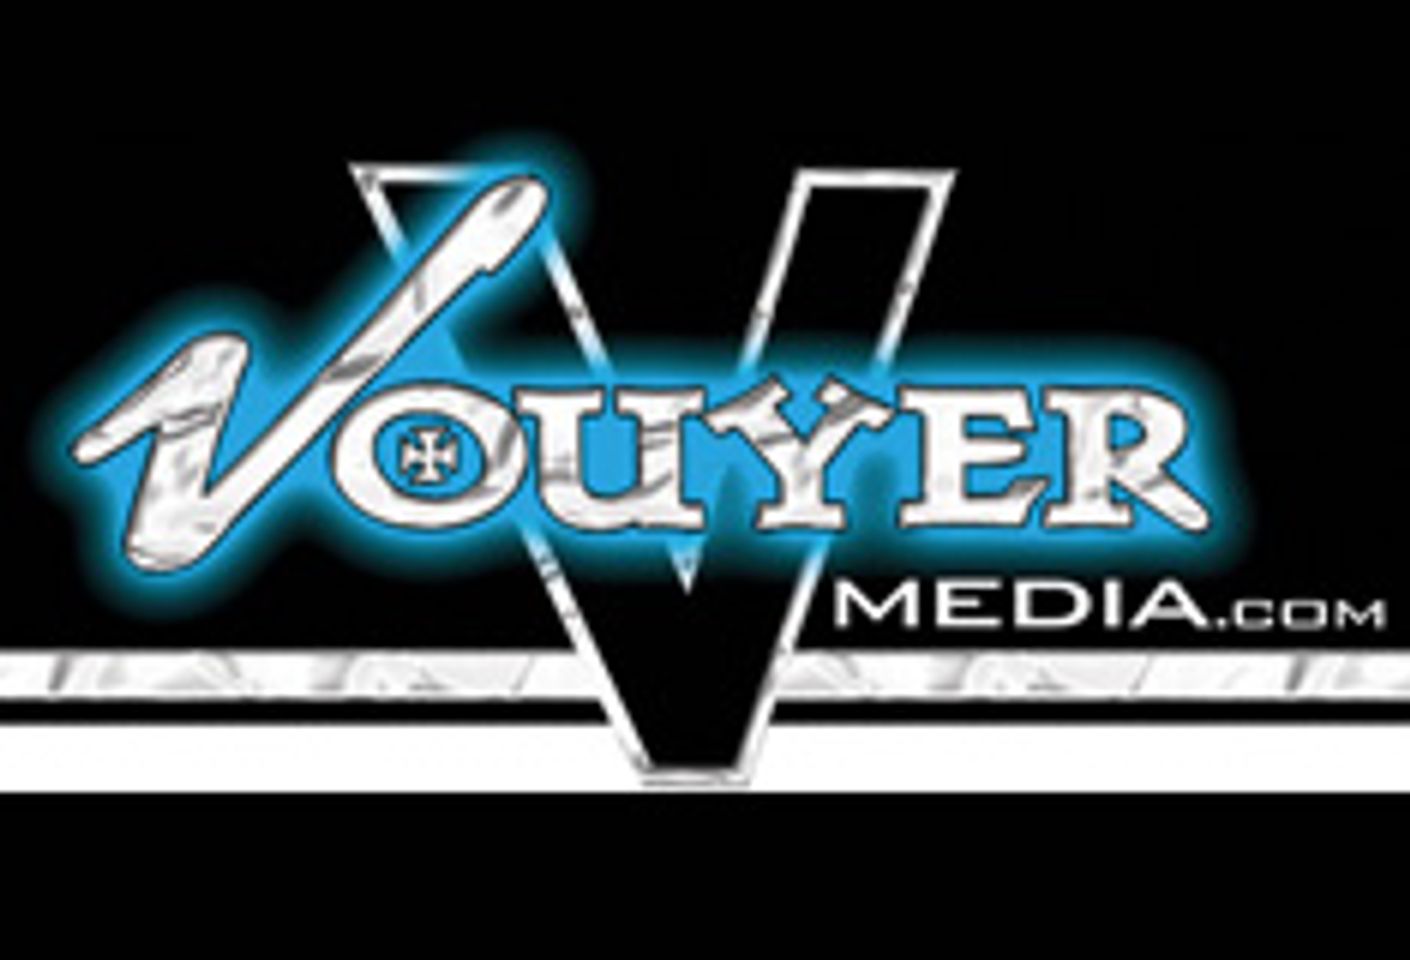 Madison Scott Gets 'Strip Searched' for Vouyer Media